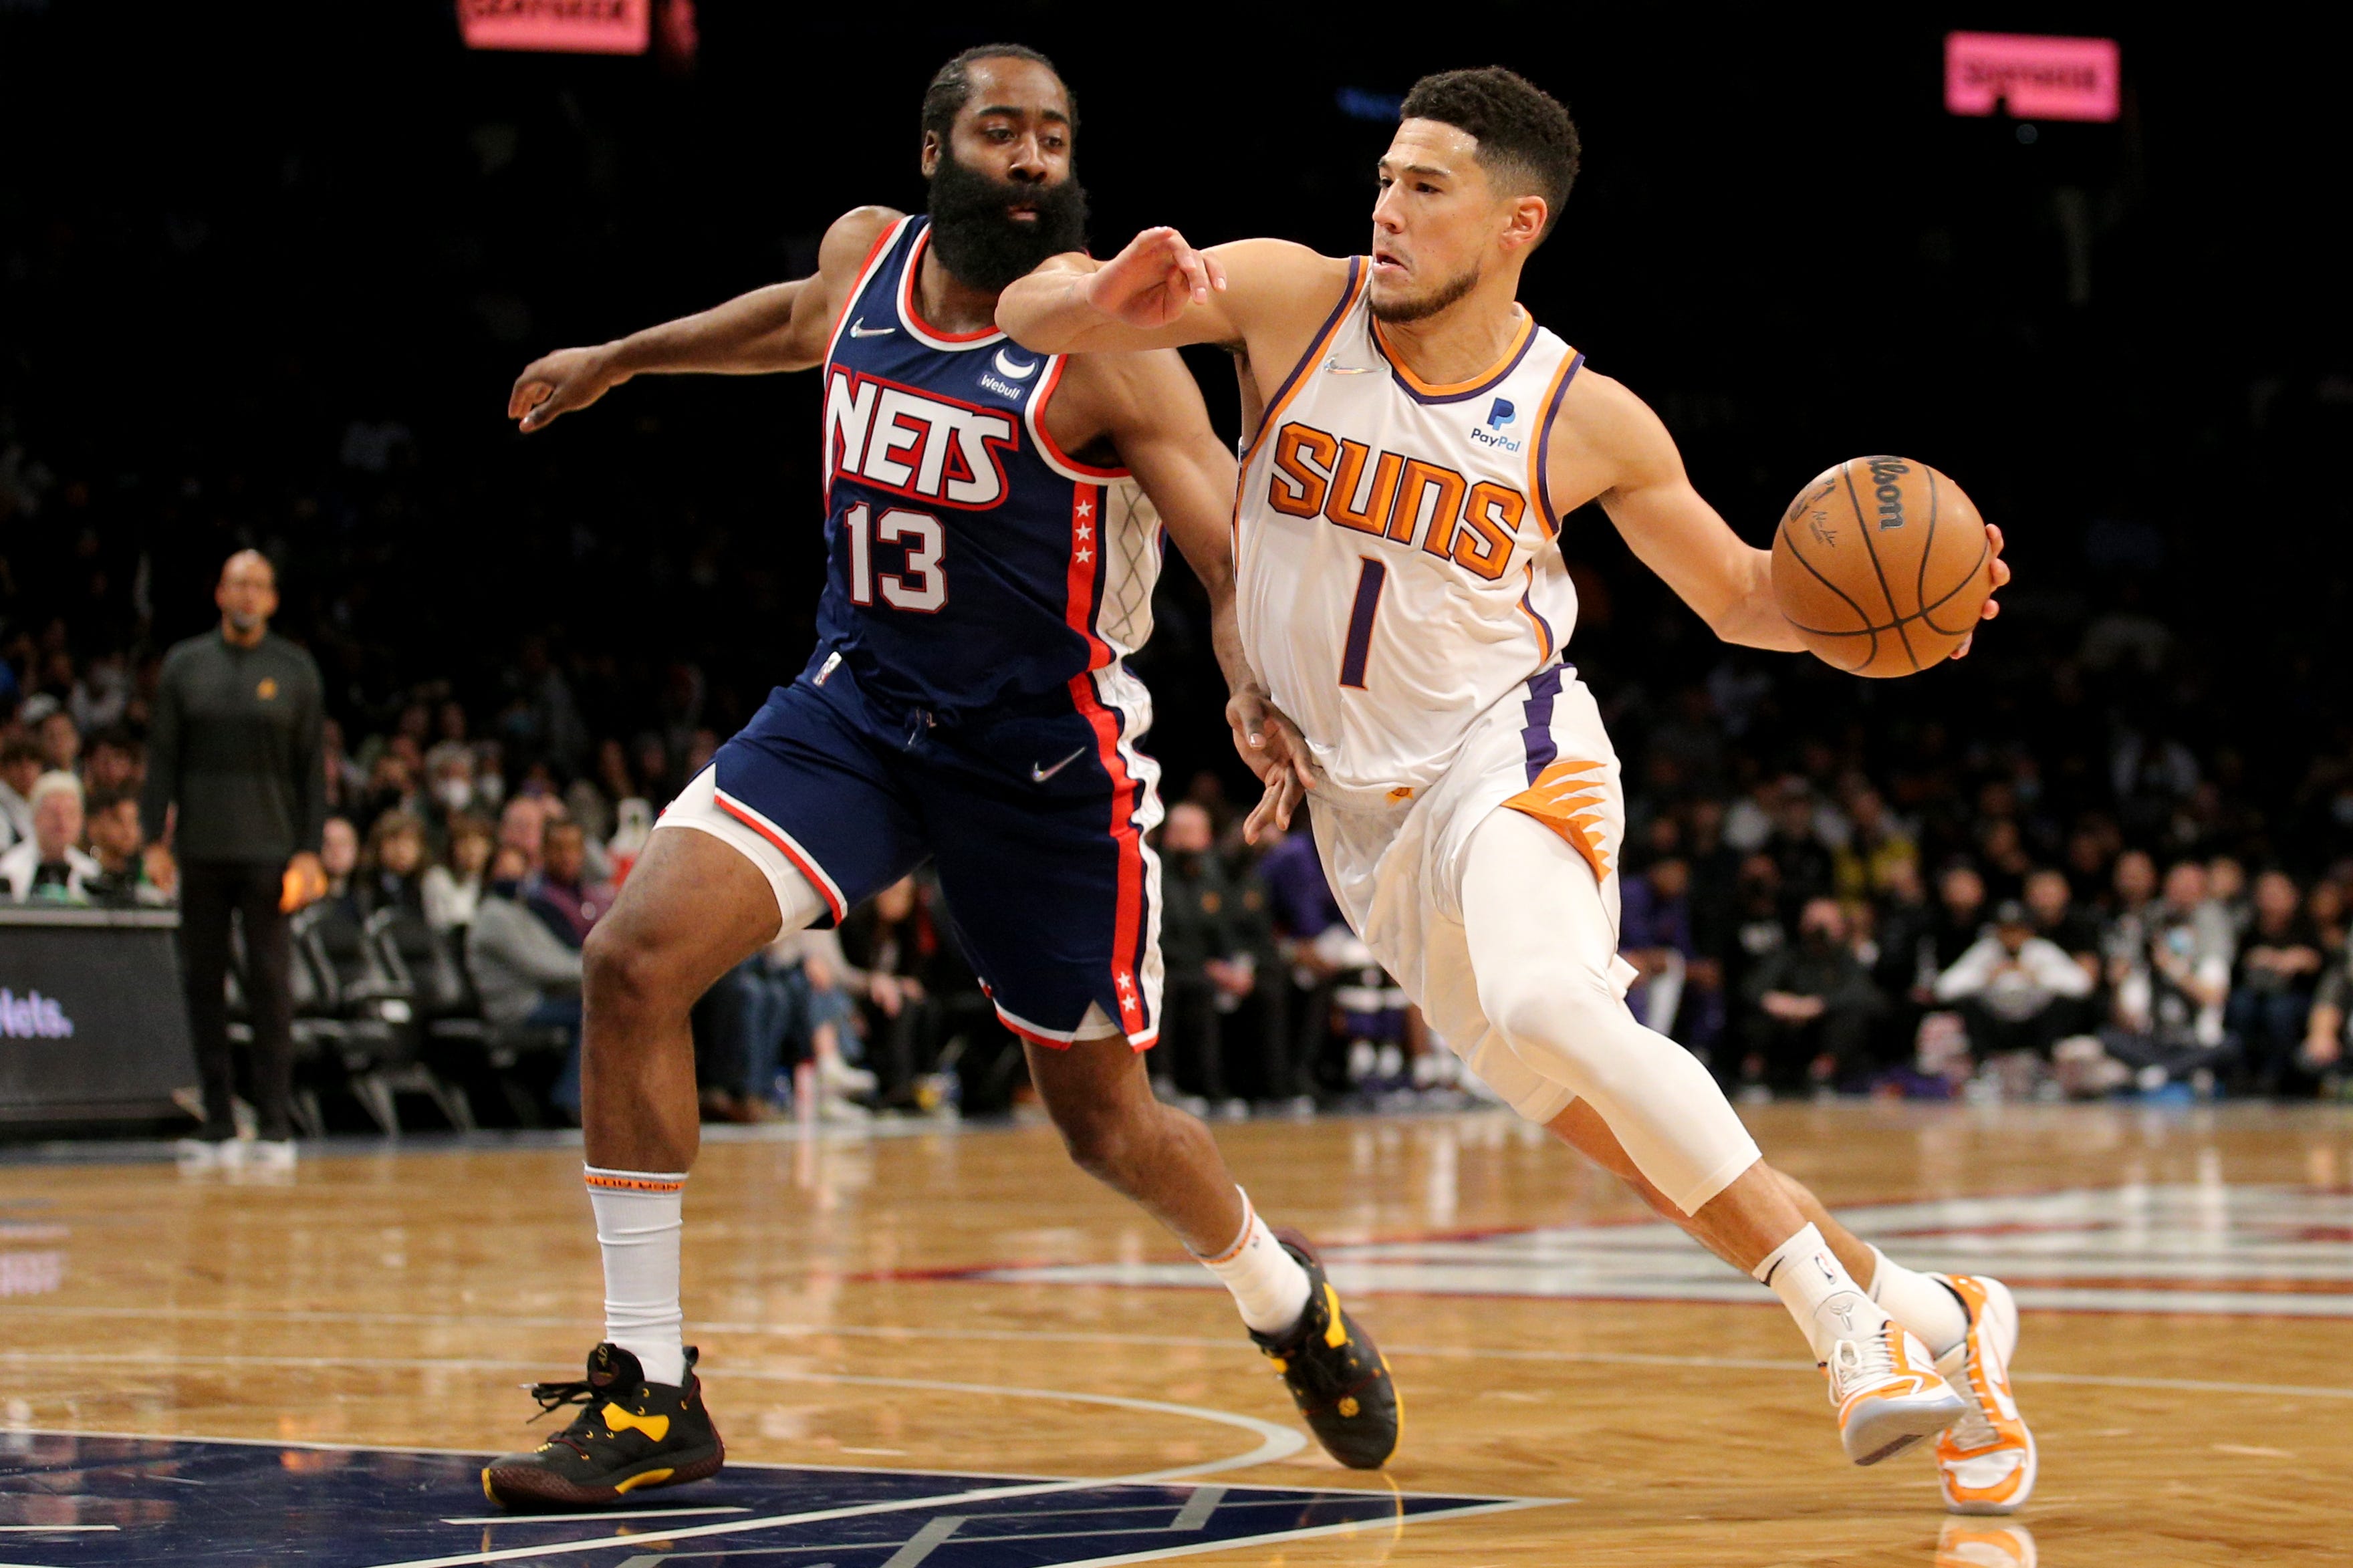 Suns overwhelm Nets in Brooklyn to extend win streak to 16 in a row